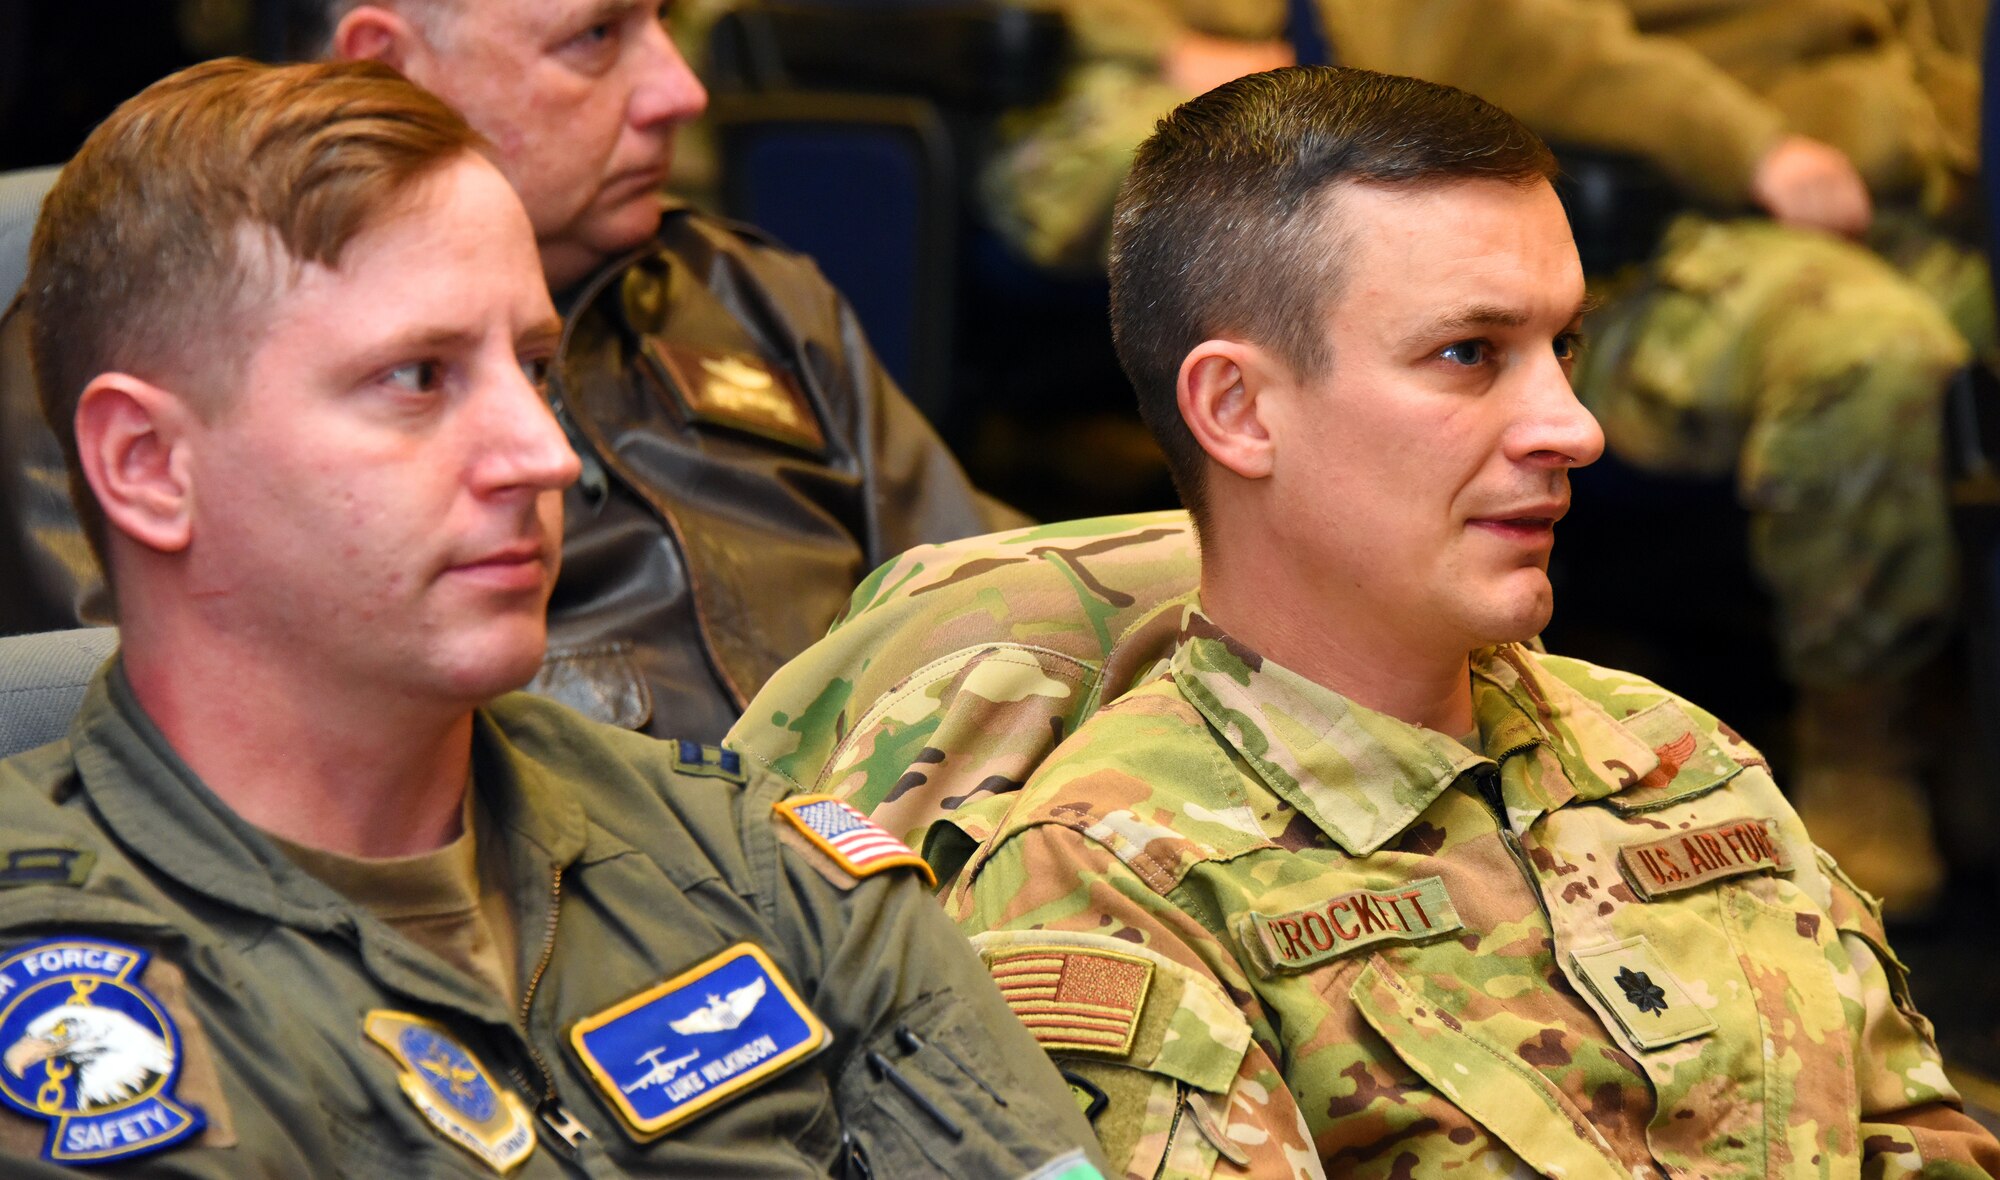 U.S. Air Force Capt. Luke Wilkinson, 305th Air Mobility Wing flight safety officer, and U.S. Air Force Lt. Col. Joshua Crockett, 305th Air Mobility Wing Chief of Safety, listen to a speaker at the symposium.